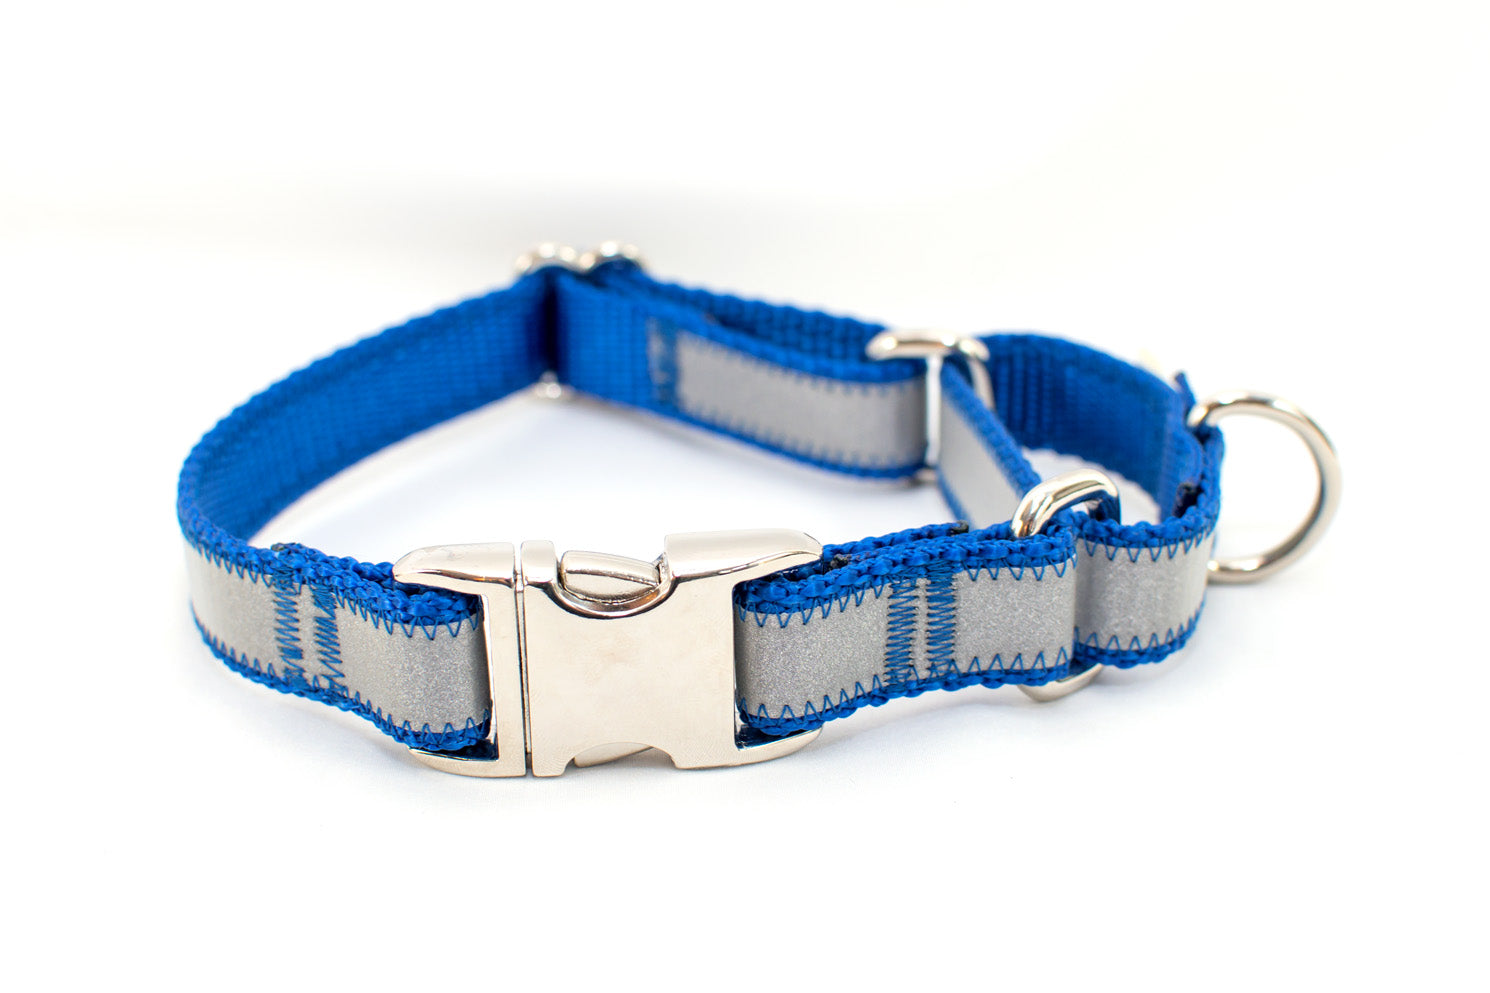 Quick Release Martingale Dog Collar | Solid or Reflective | 4 widths! - Fox Valley Pet Wear